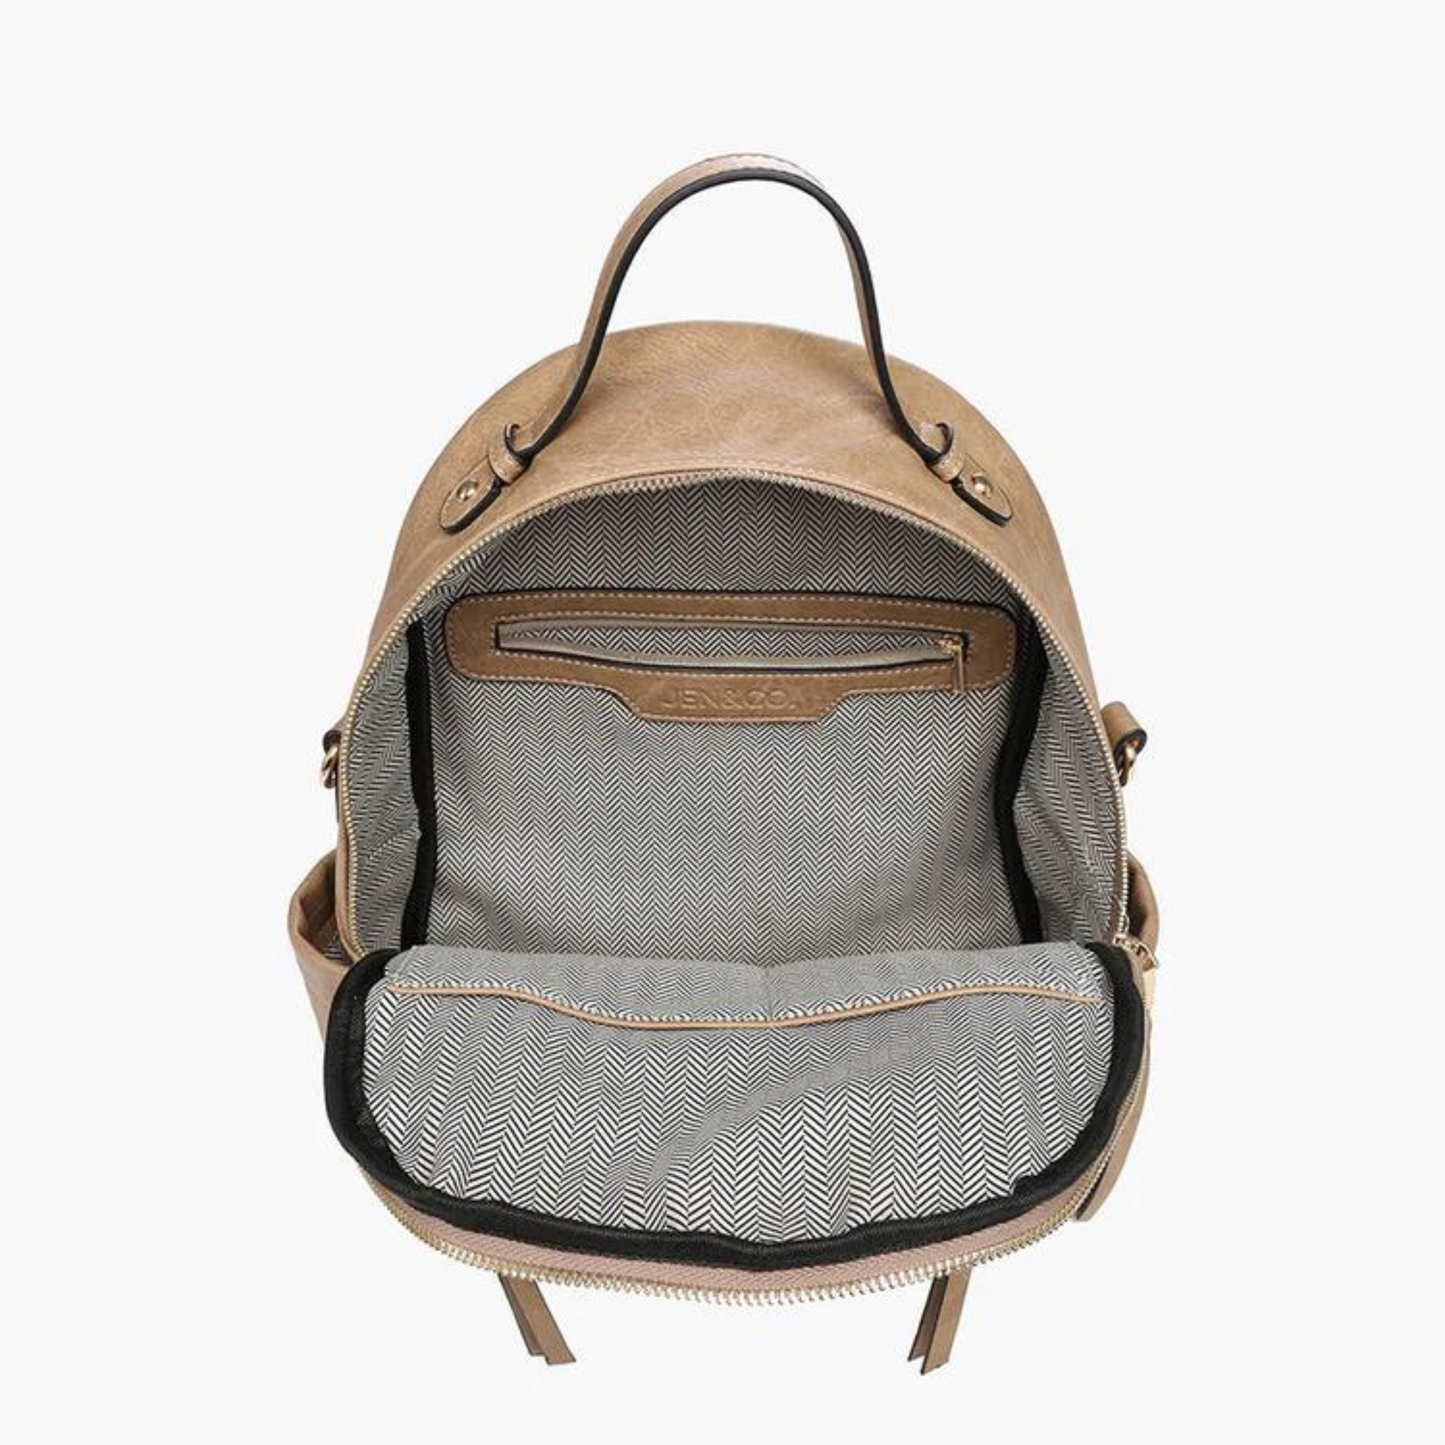 Inside view of Lillia convertible backpack